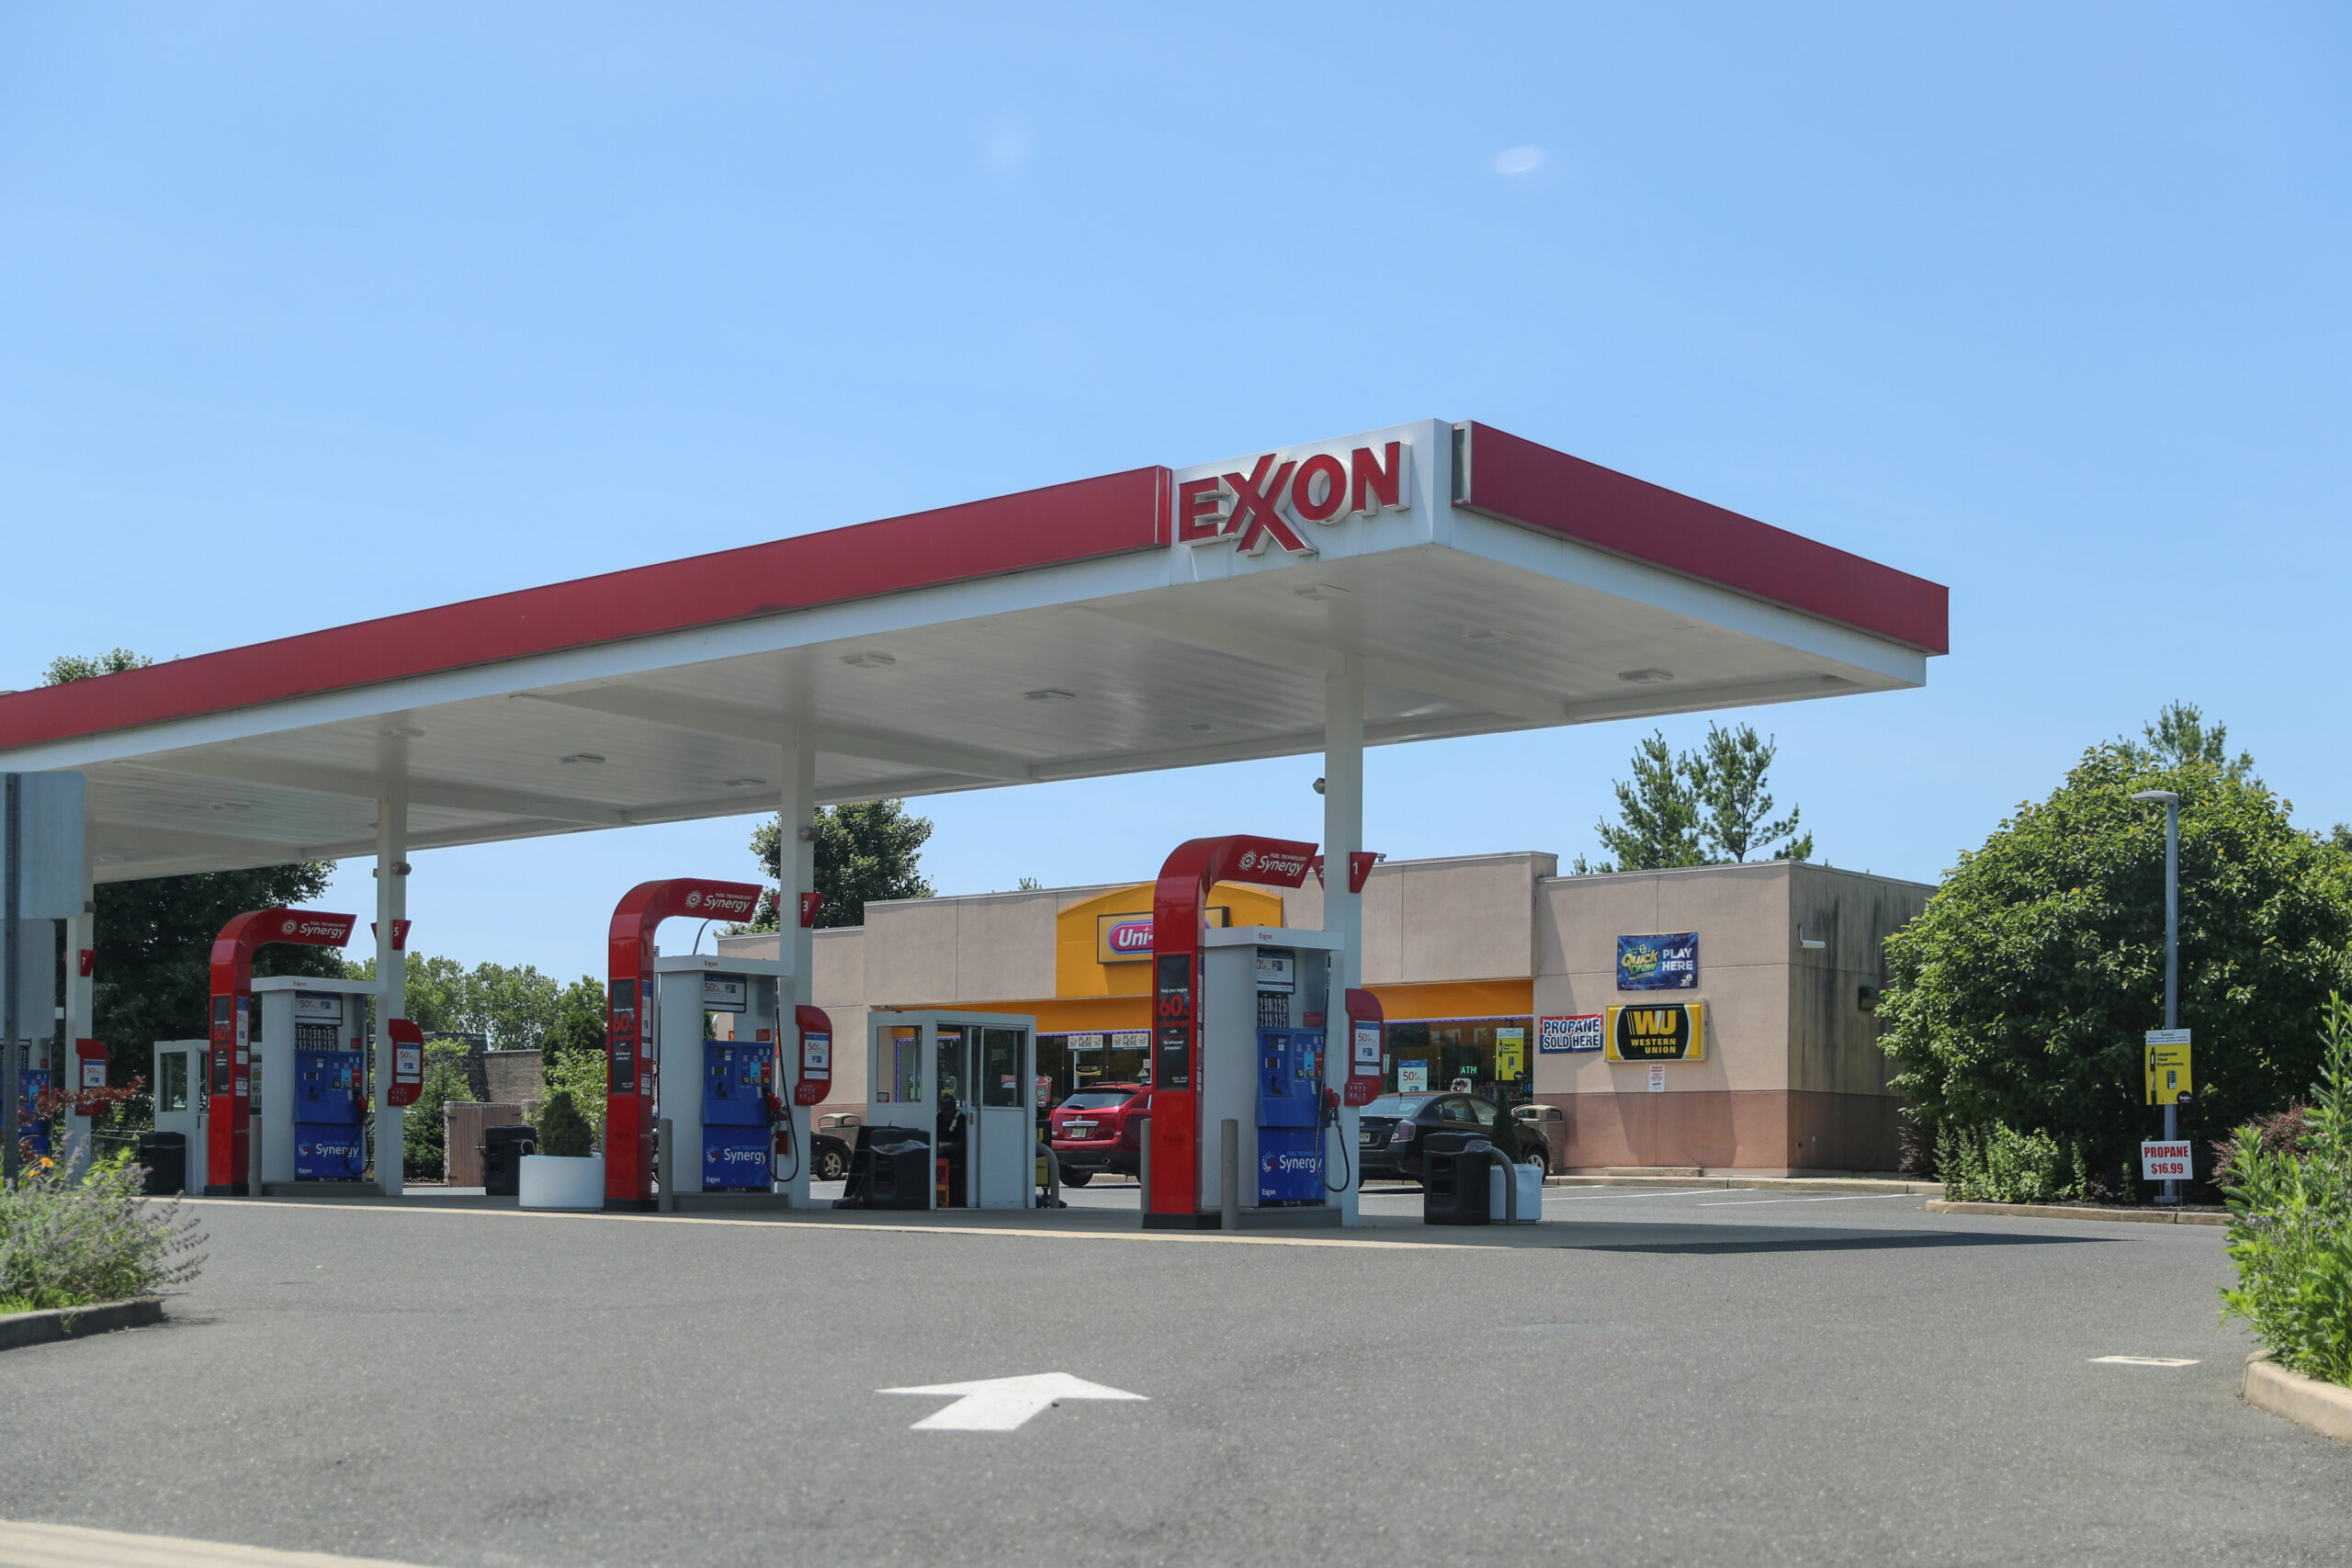 ExxonMobil gas station with pumps